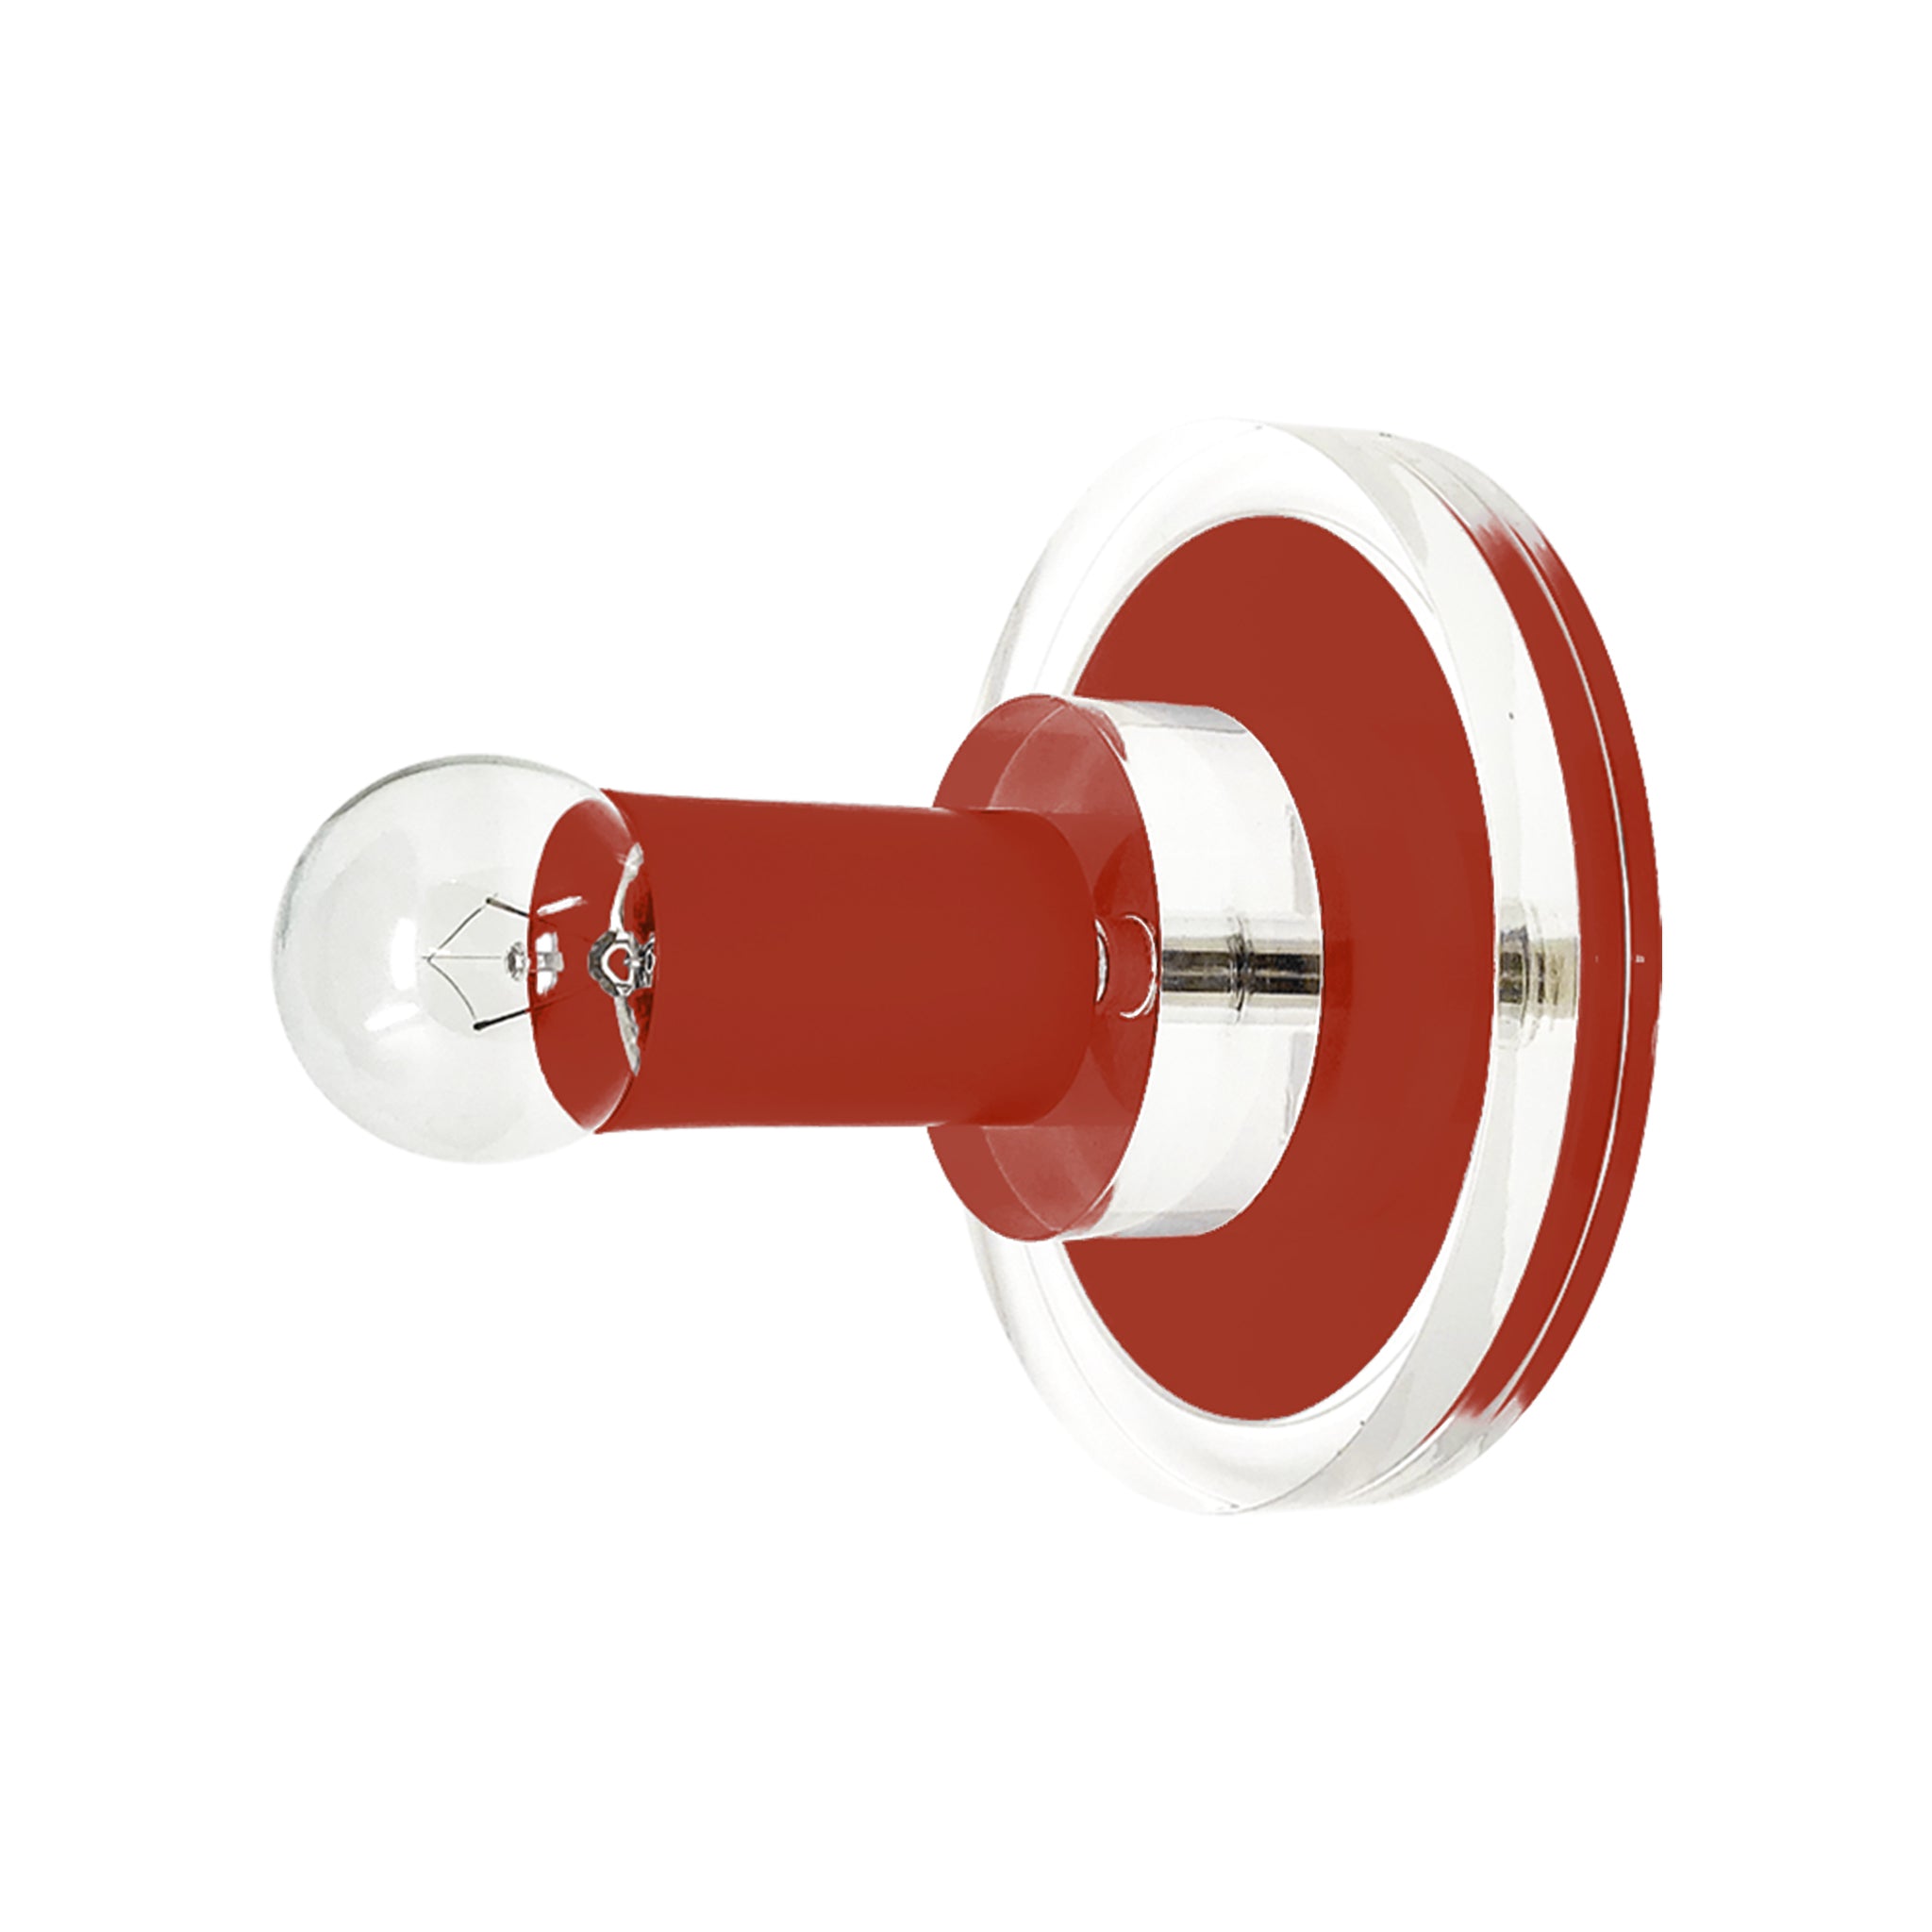 Riding hood red color Lepore sconce Dutton Brown lighting